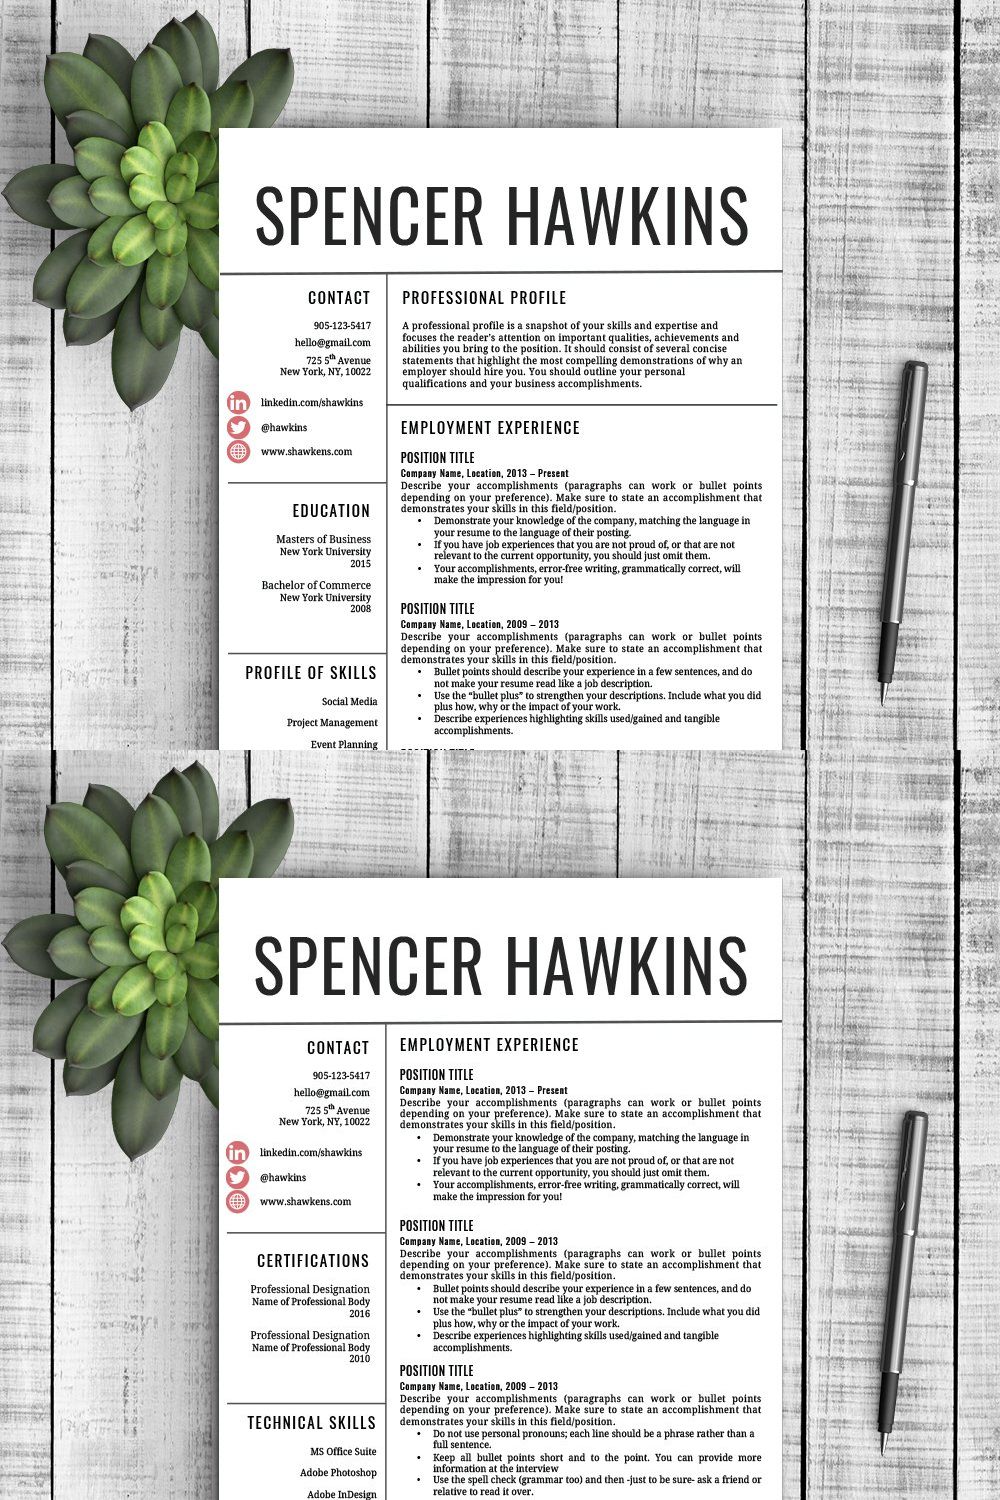 Resume Template "Spencer" pinterest preview image.